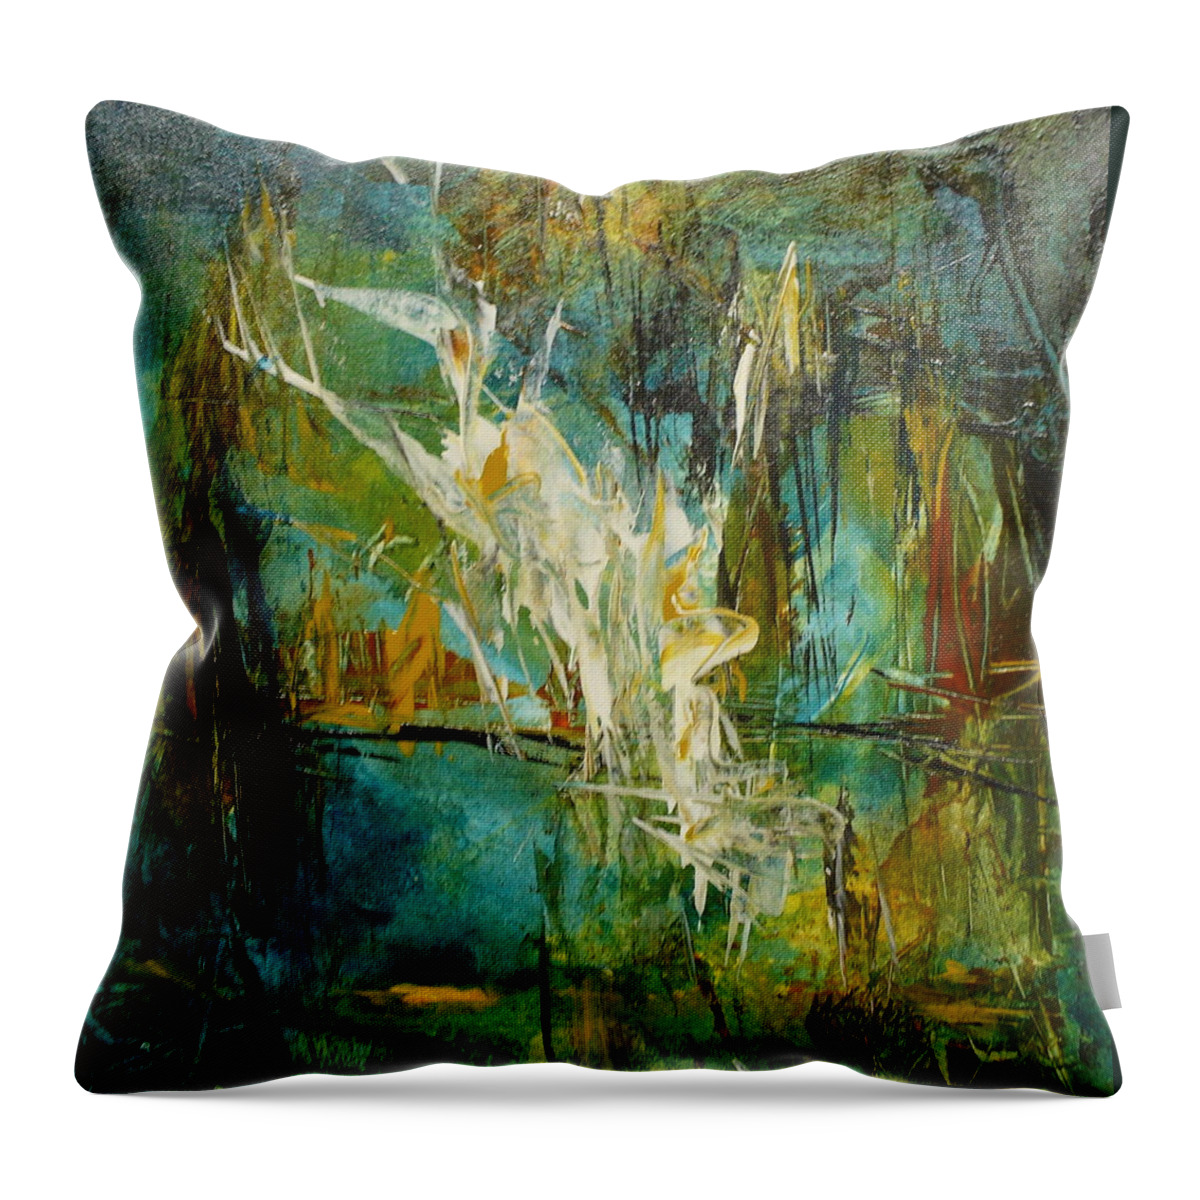 Contemporary Throw Pillow featuring the painting Tropical Rhythms by Mary Sullivan